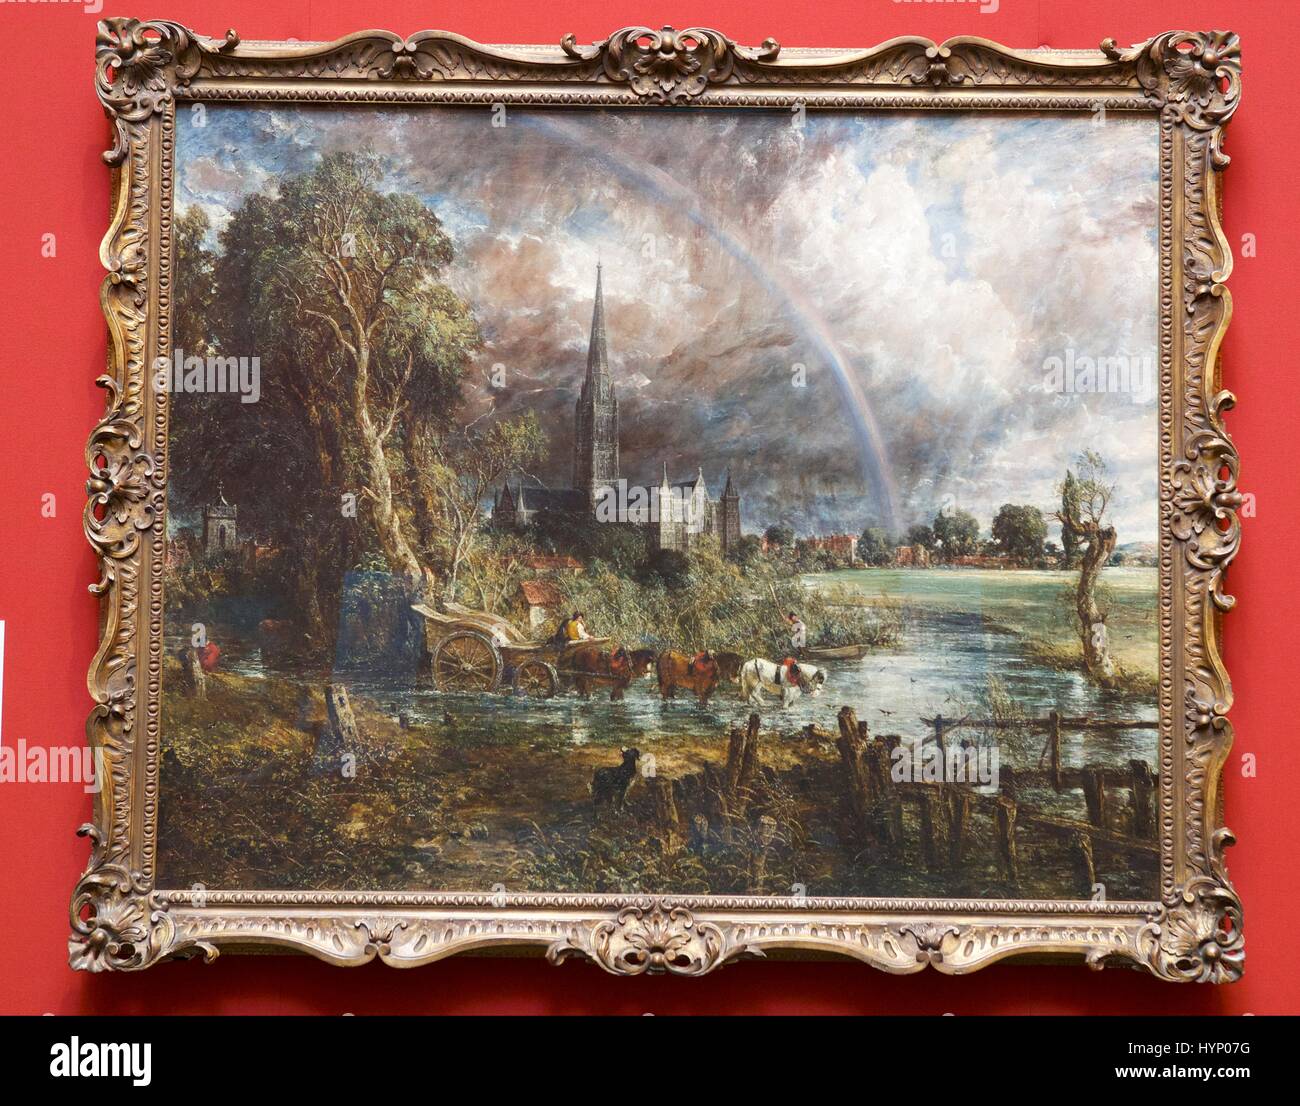 Edinburgh, UK. 6th Apr, 2017. The Scottish National Gallery hosts one of British arts finest masterpieces, Constable's Salisbury Cathedral from the Meadows (1831). The display is part of Aspire, a partnership programme touring the painting across the UK. Credit: Rich Dyson/Alamy Live News Stock Photo